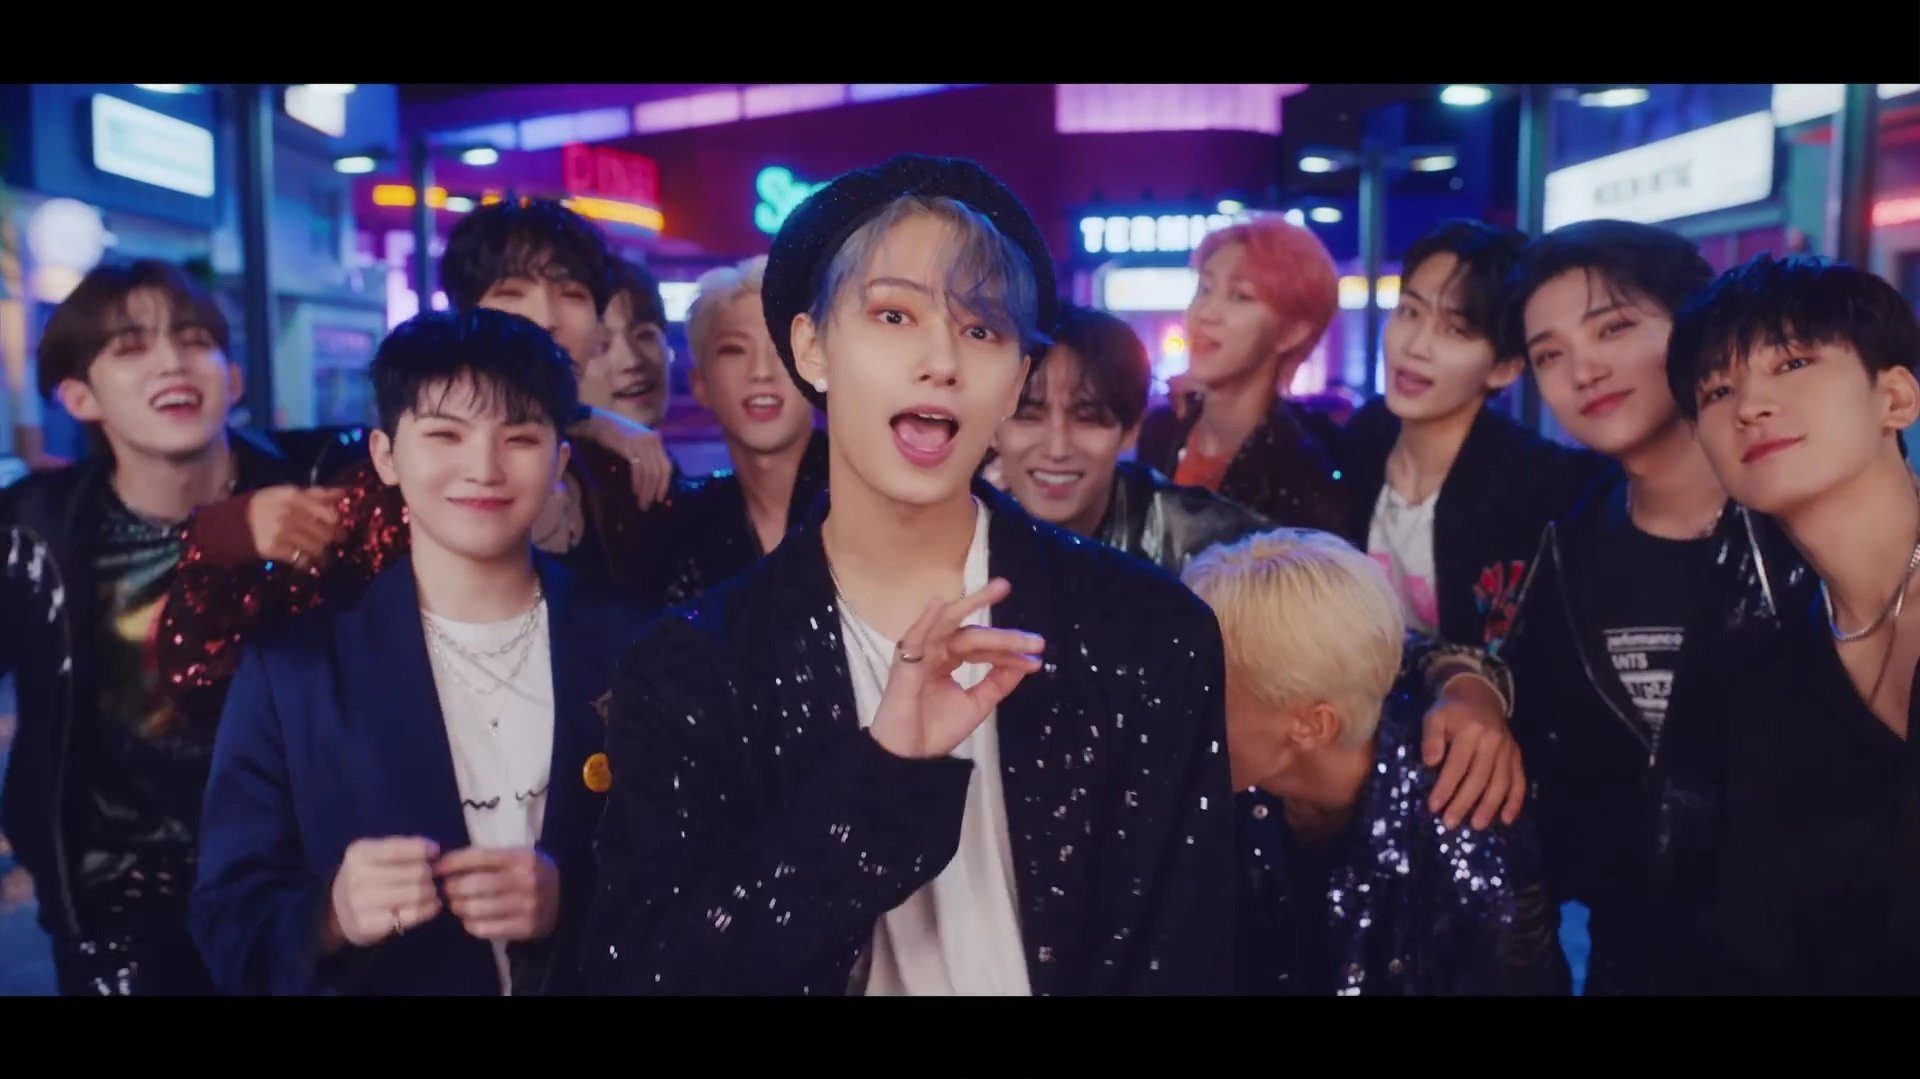 WATCH: SEVENTEEN invites us to ‘_WORLD’ in new music video